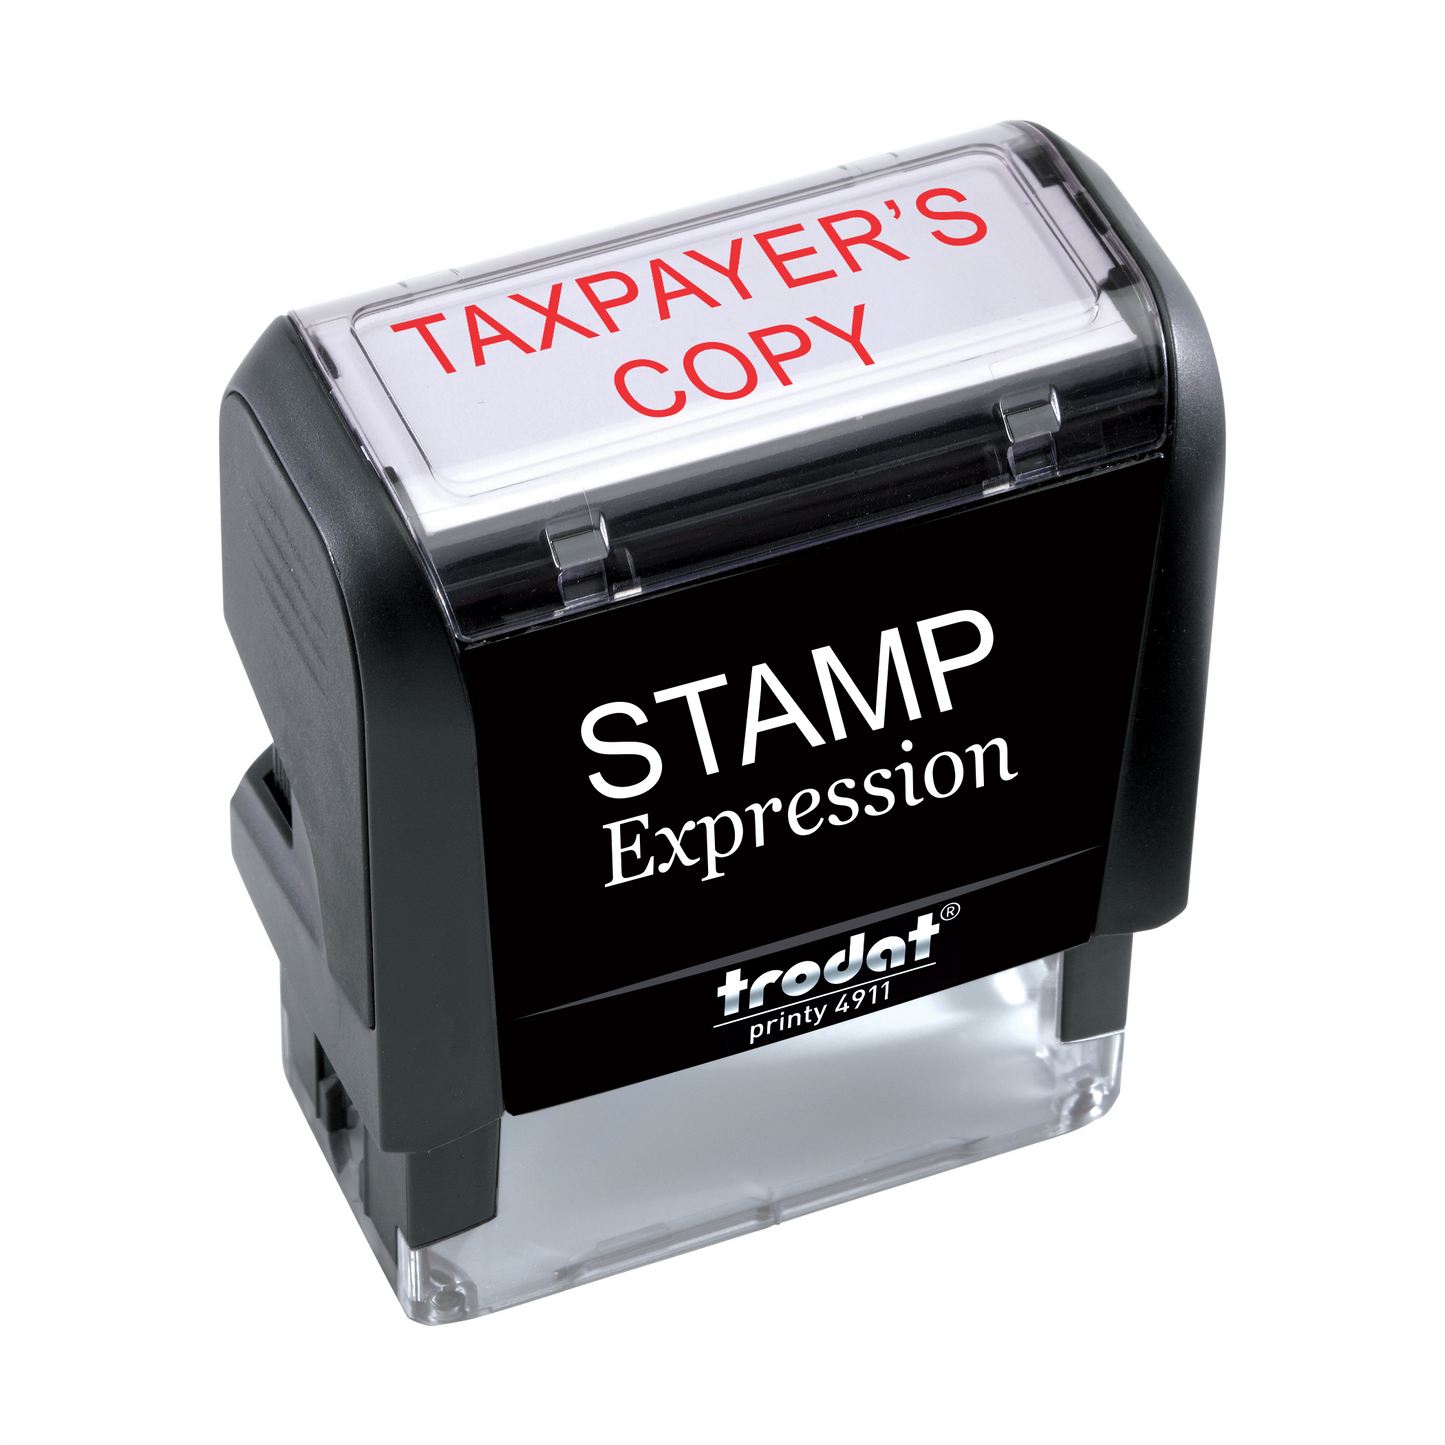 TAXPAYER'S Copy Office Self Inking Rubber Stamp (SH-5845)